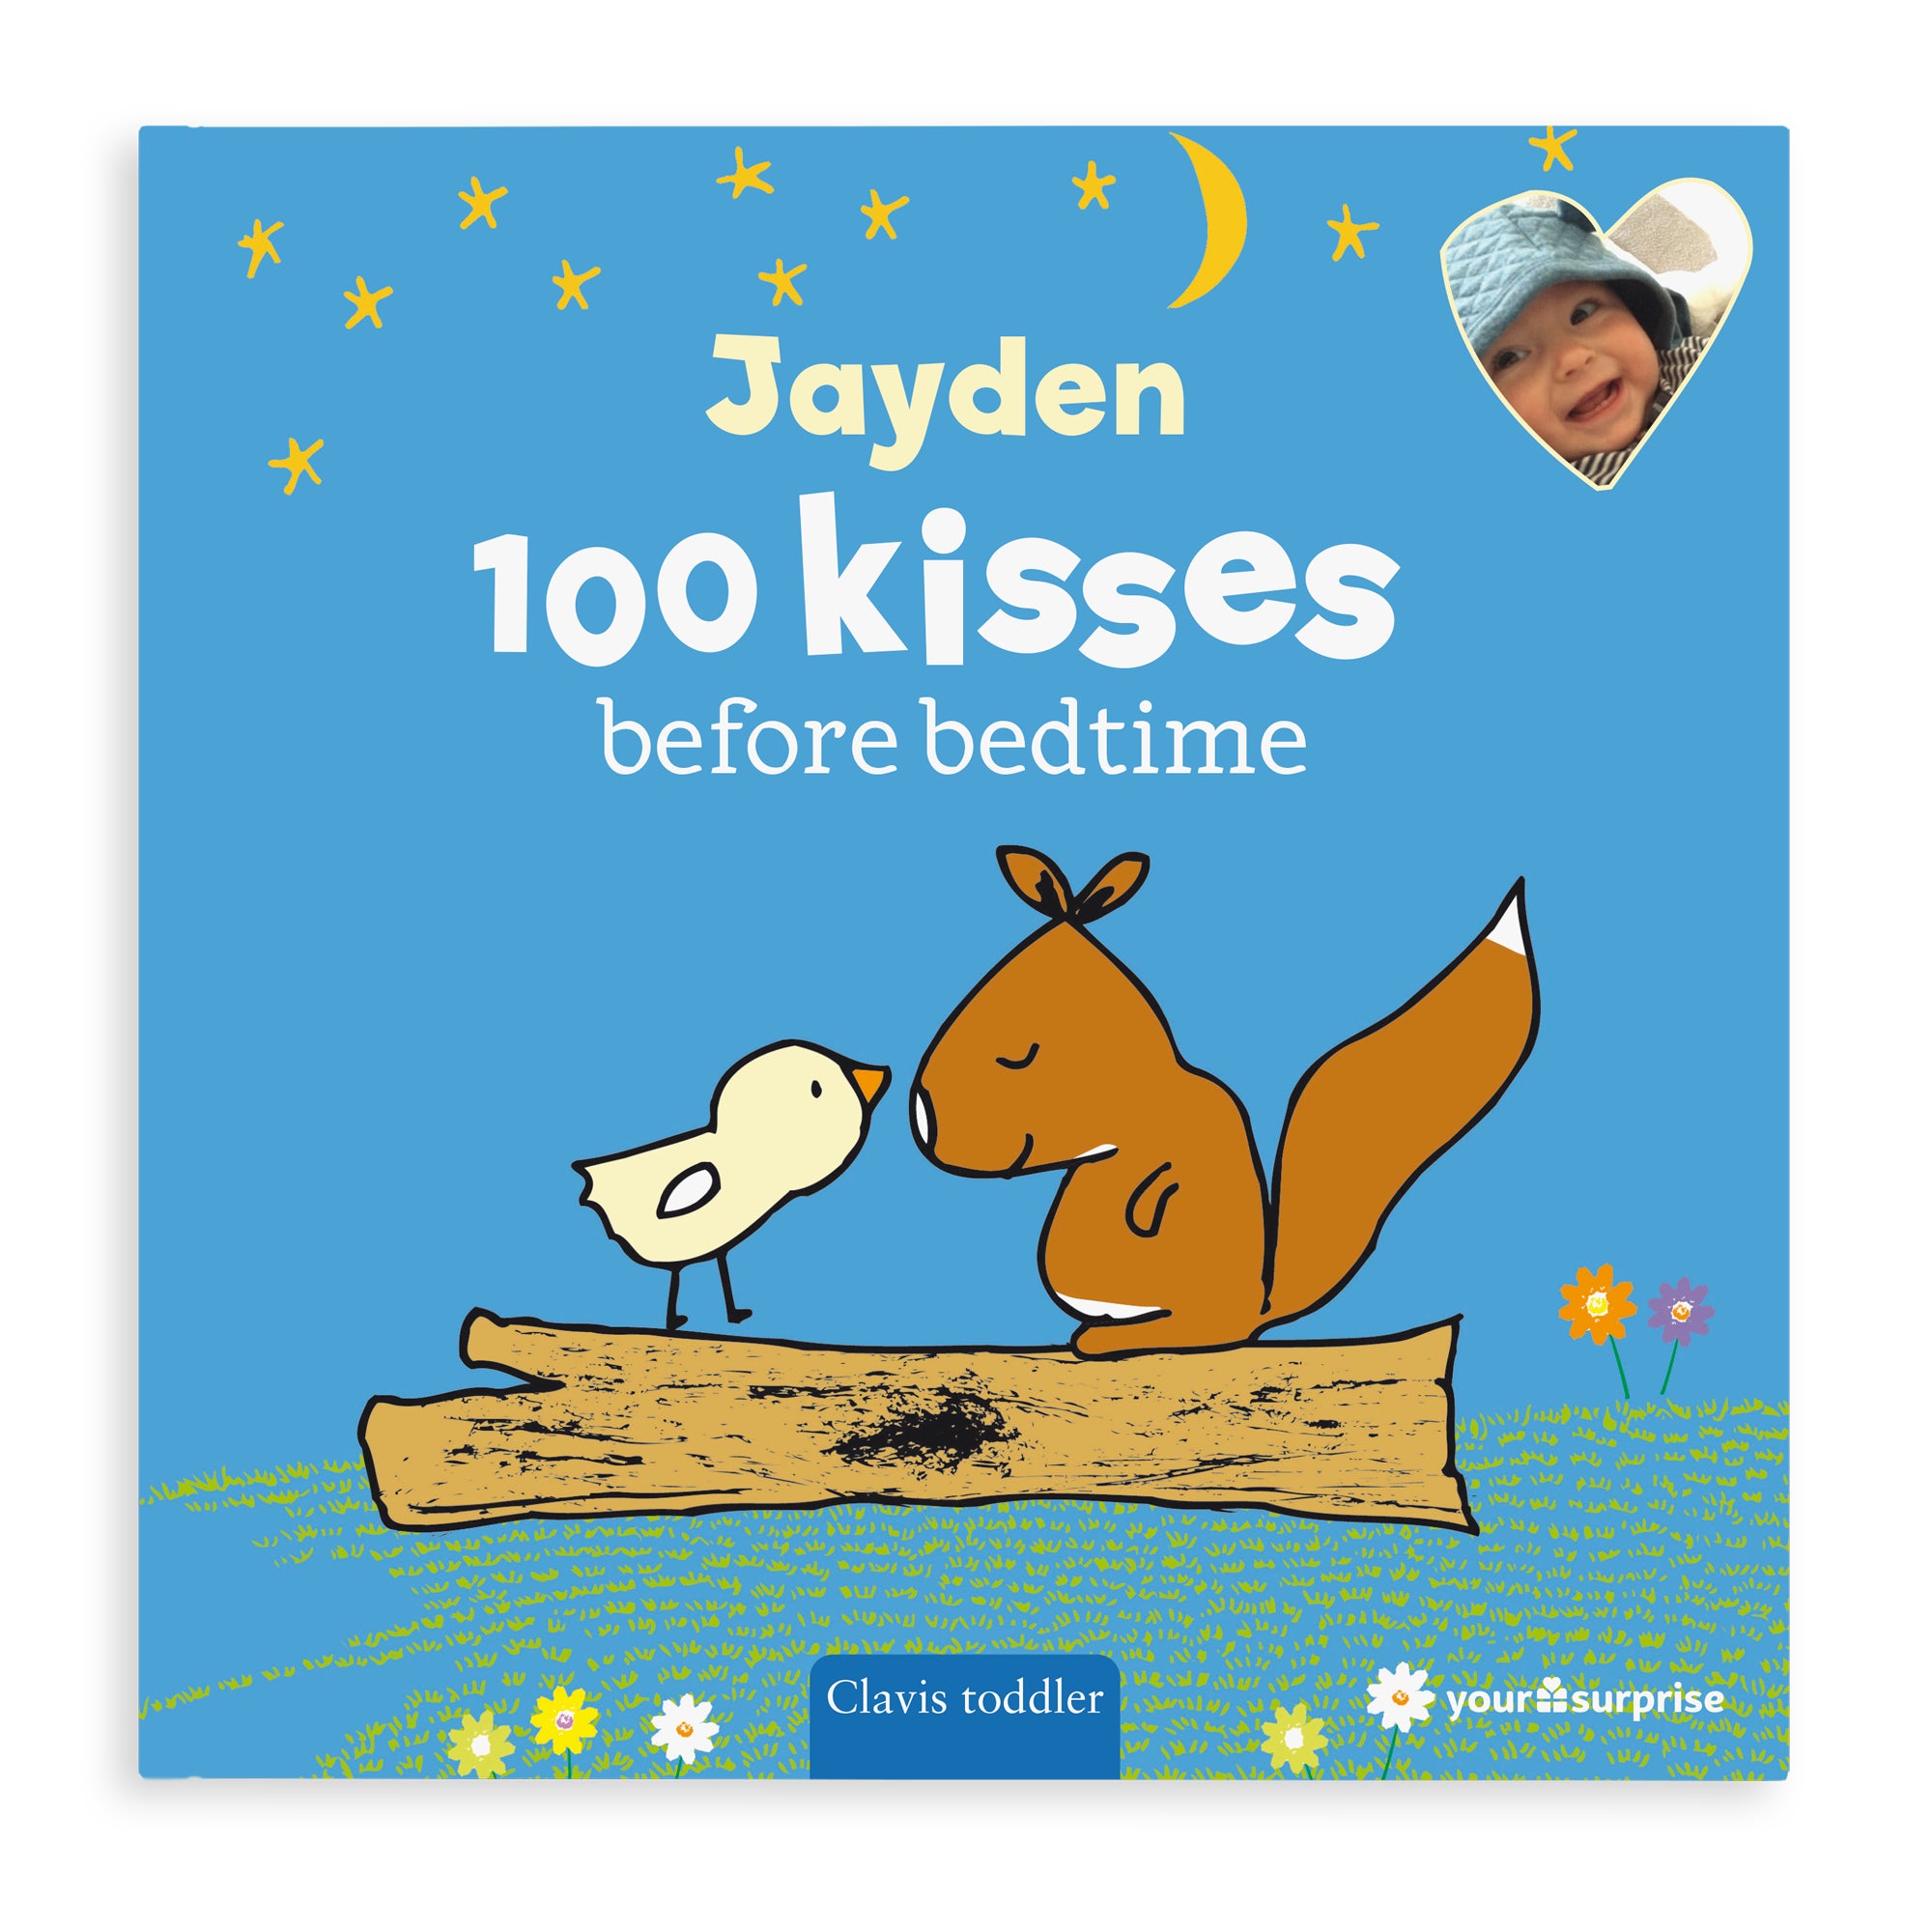 Personalised children's book - 100 kisses before bedtime - Softcover